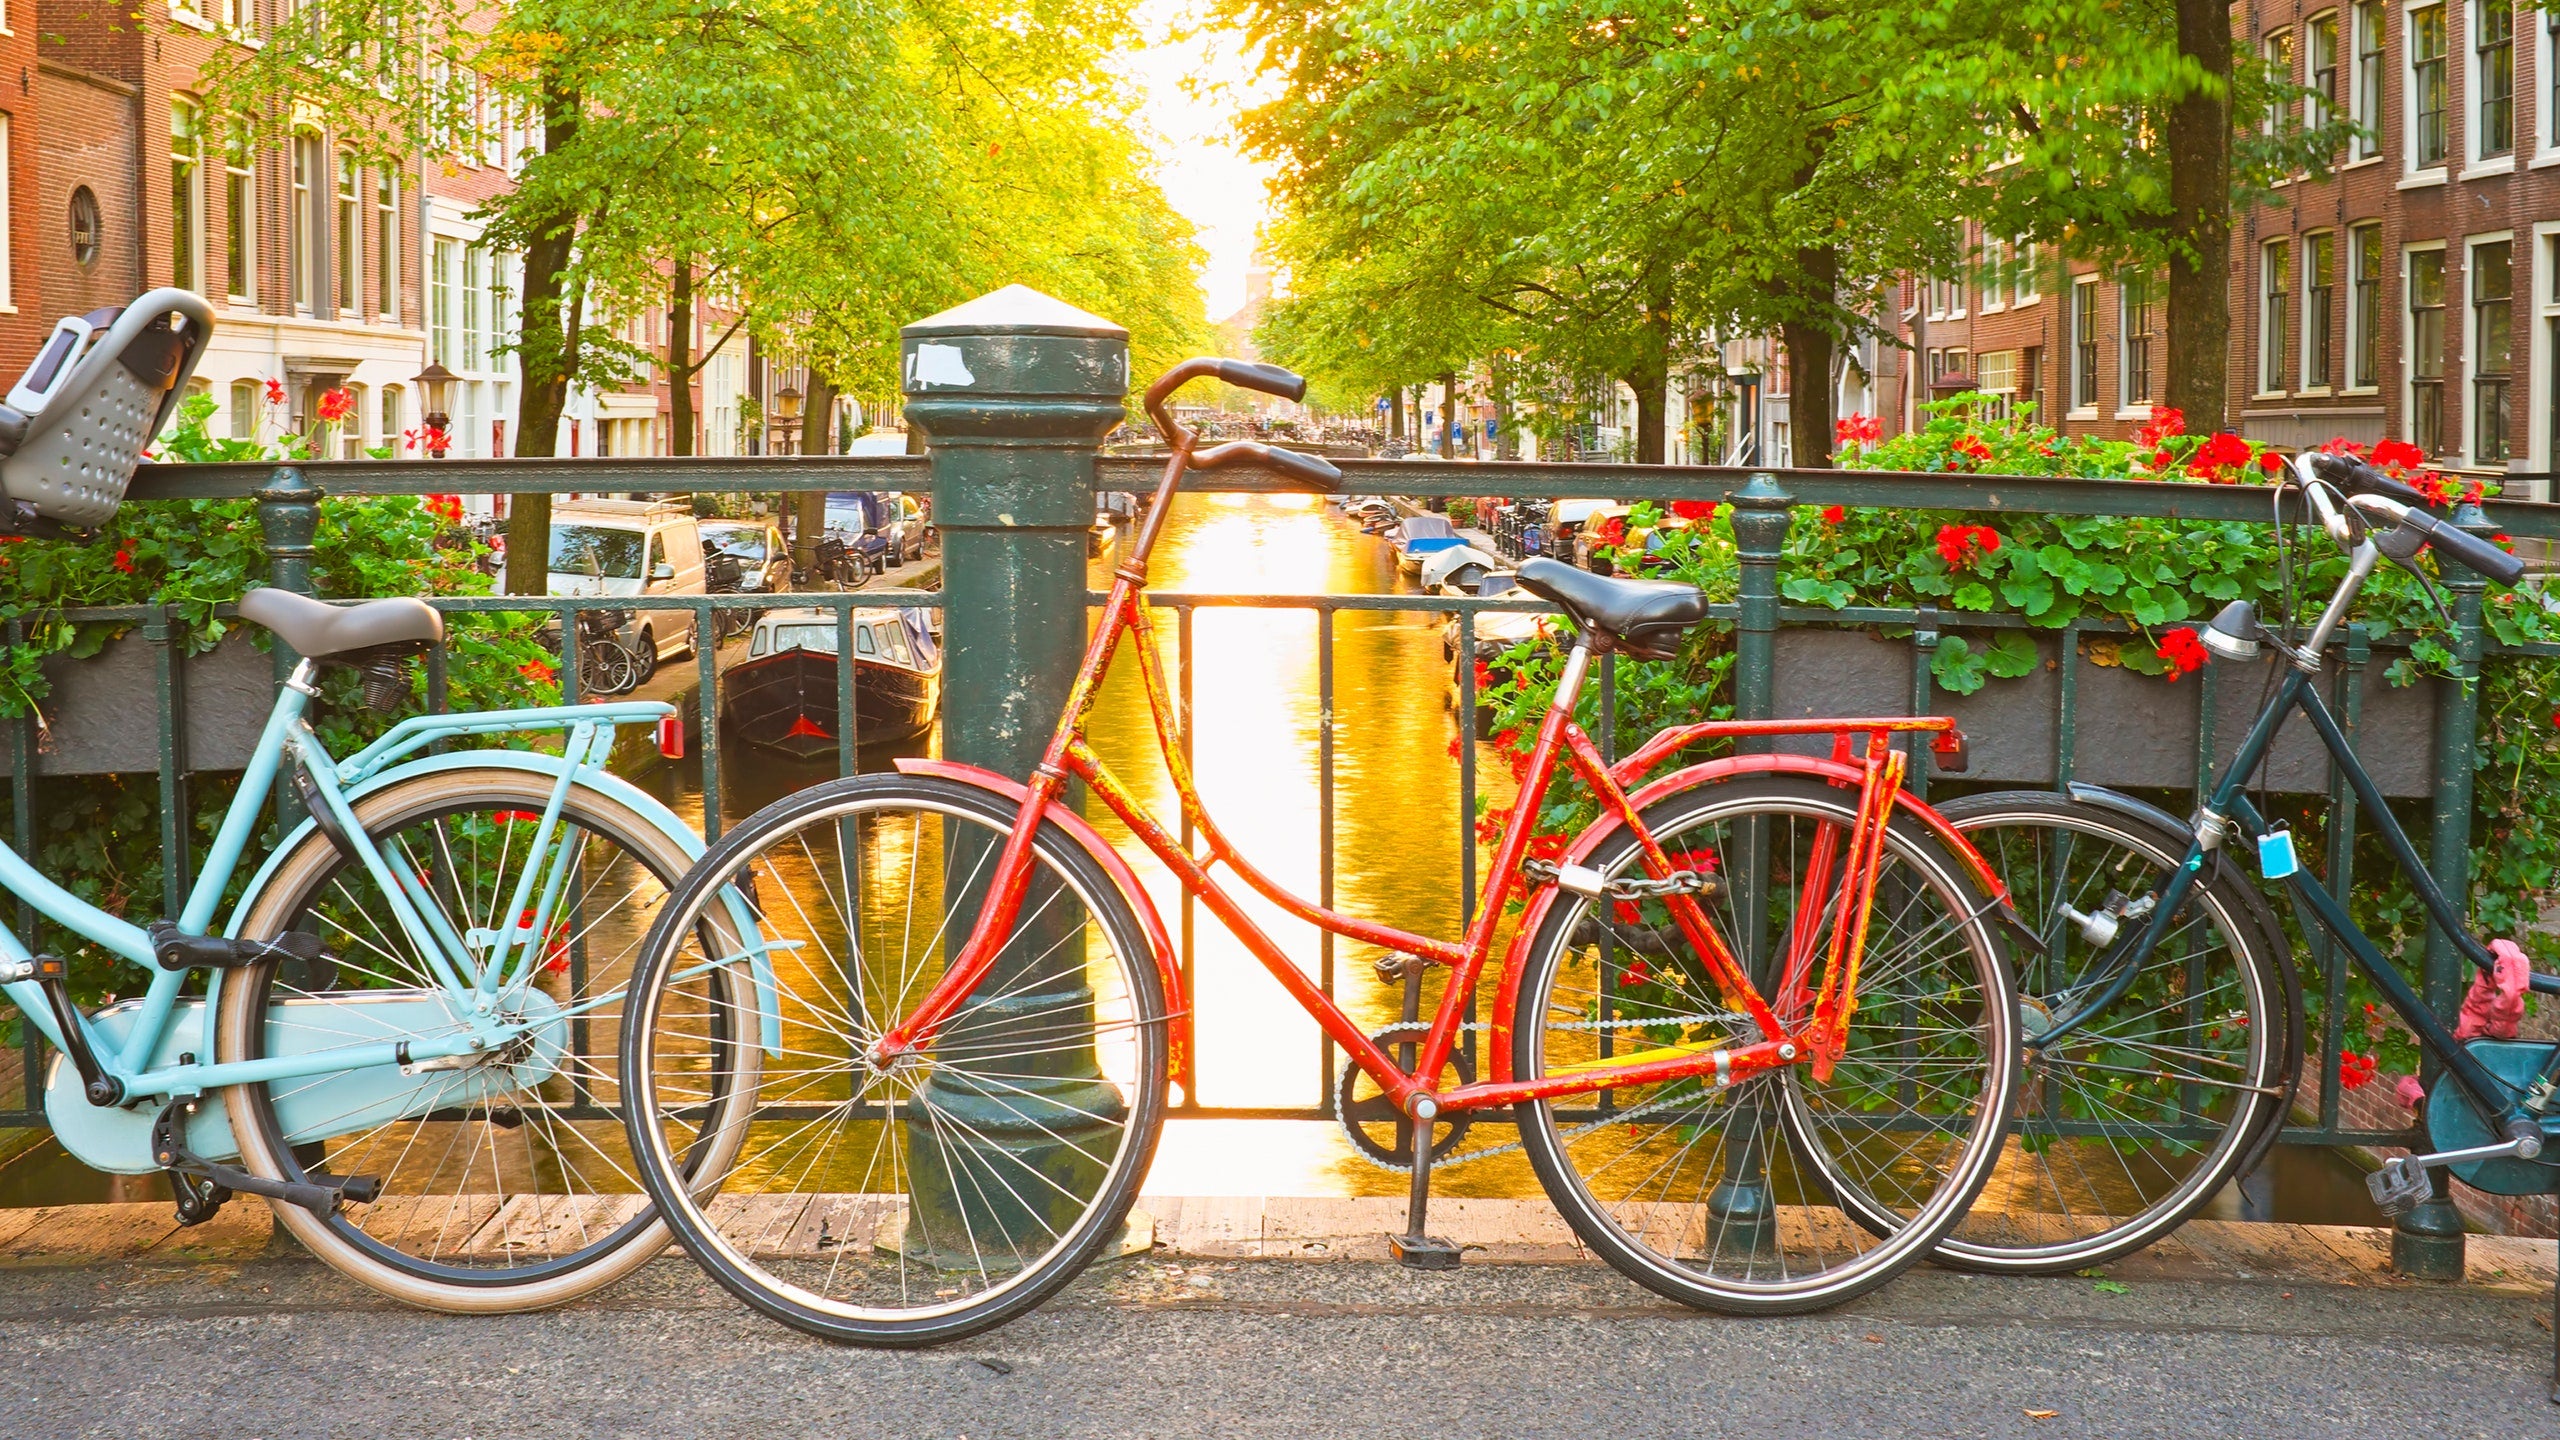 Interesting and fun facts about bicycles in Amsterdam – Velosock Bike Covers